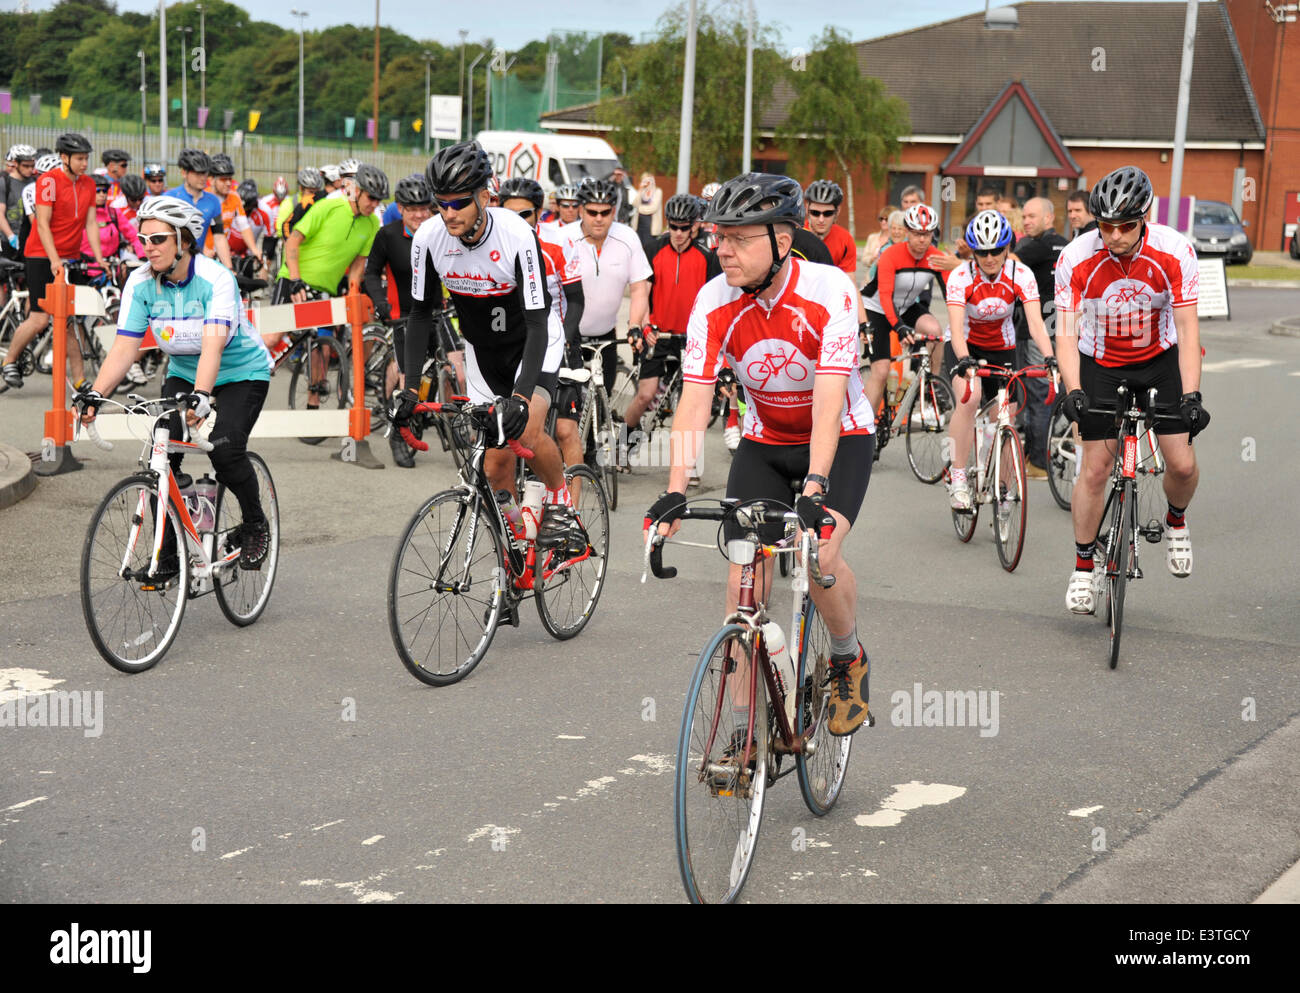 Ride For The 96 - Annual charity bike ride in memory of those who died at Hillsborough Stadium disaster in 1989 Stock Photo